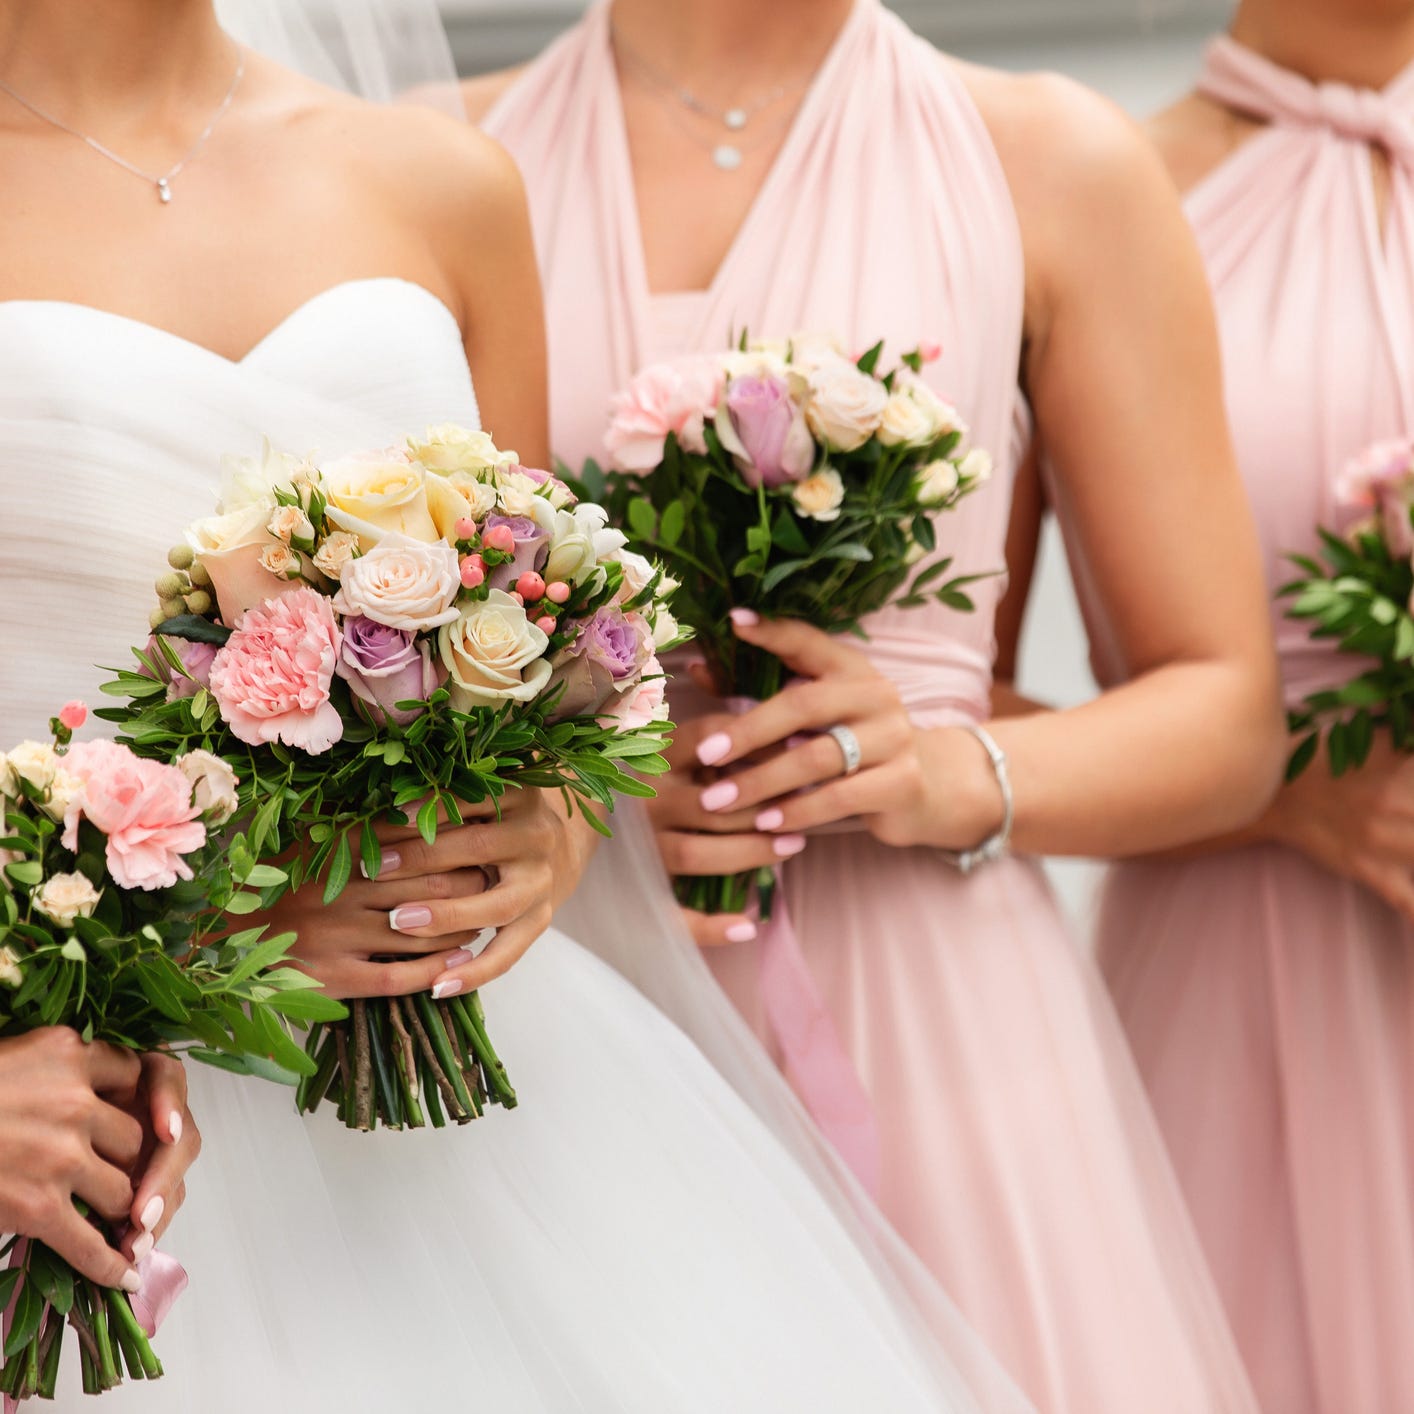 Do I have to ask my fiance's sister to be my bridesmaid if we're not close?